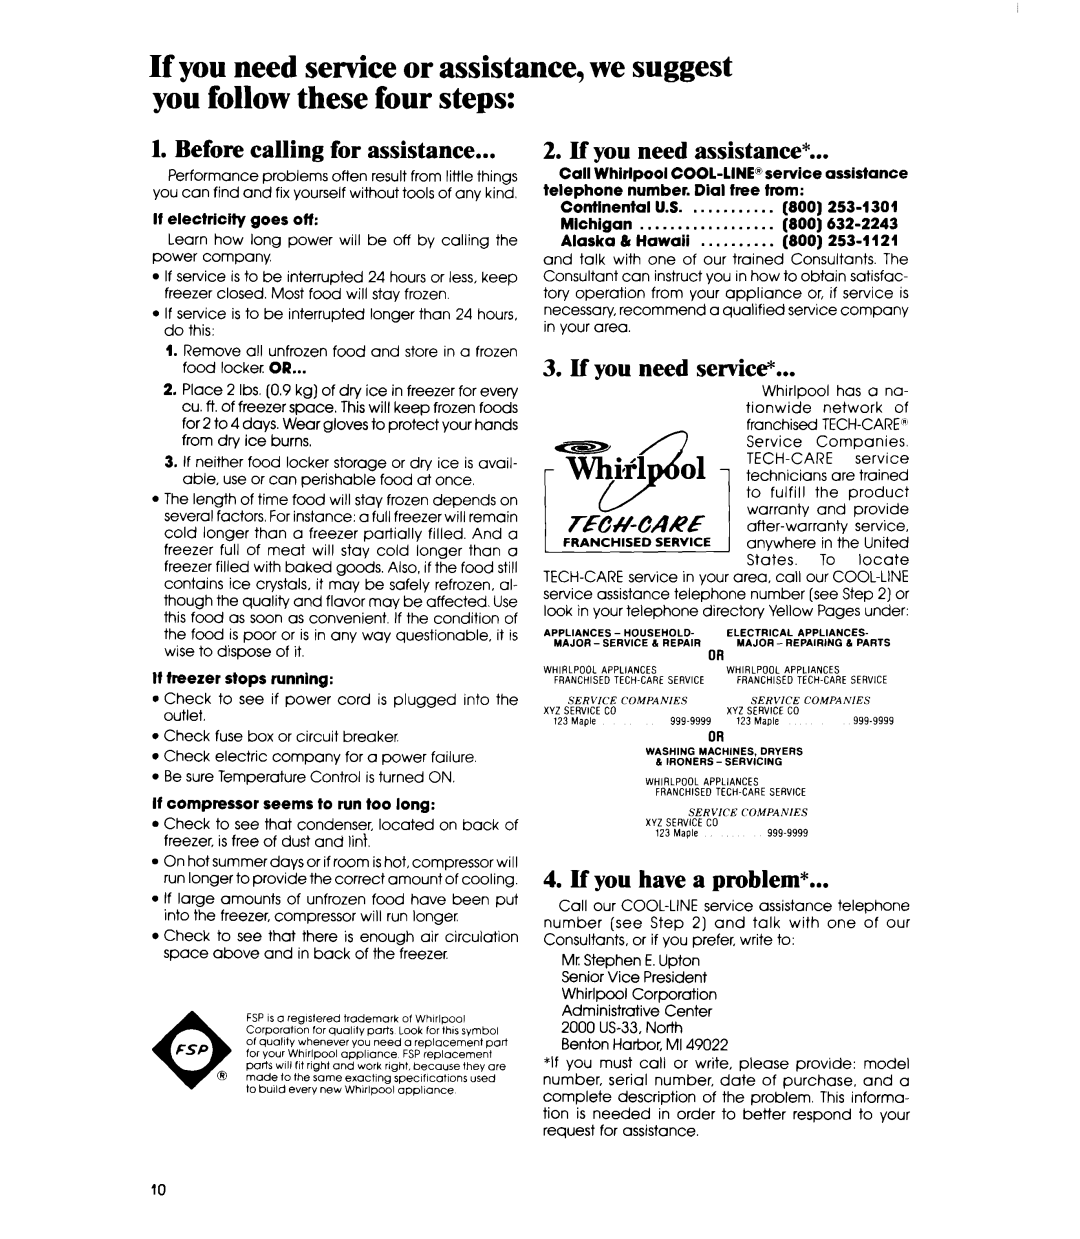 Whirlpool EVIIOCXR manual Before calling for assistance, If you need assistance, lf you need servic, If you have a problem 